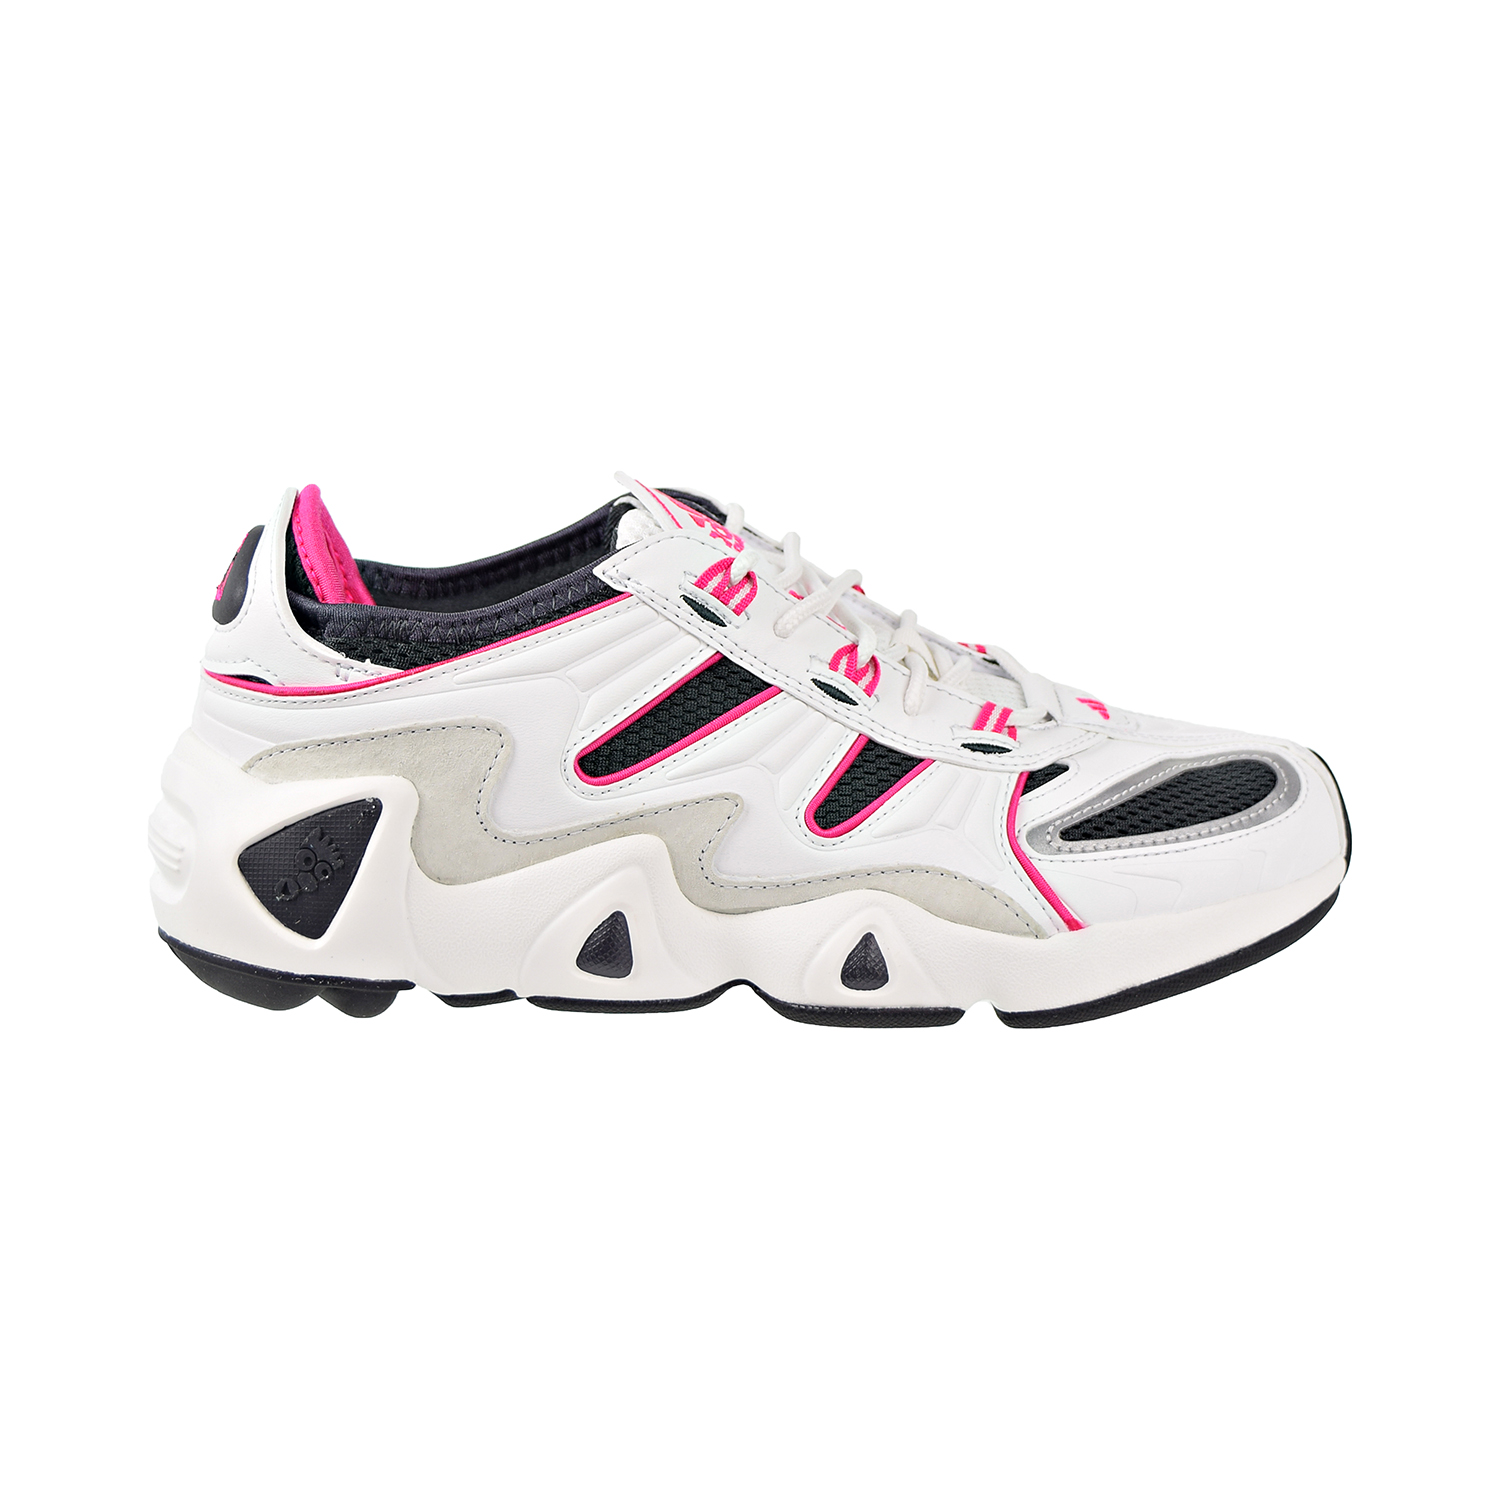 suspicious Toes Preferential treatment Adidas FYW S-97 Unisex Shoes Crystal White-Shock Pink g27987